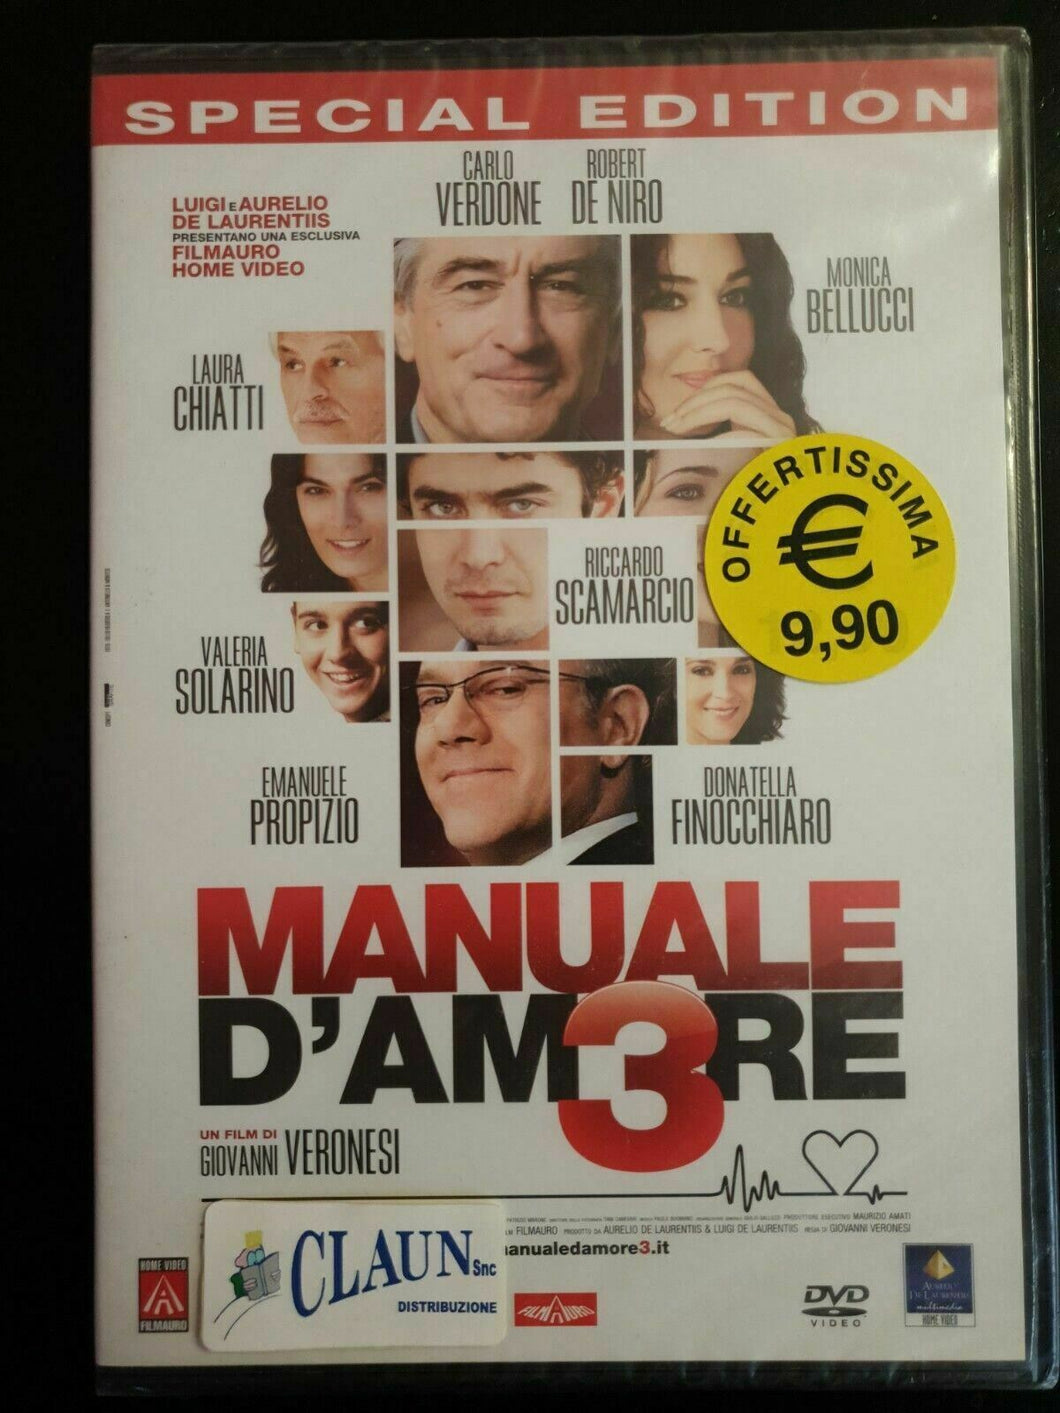 Manuale d'amore 3 (2011) DVD Nuovo